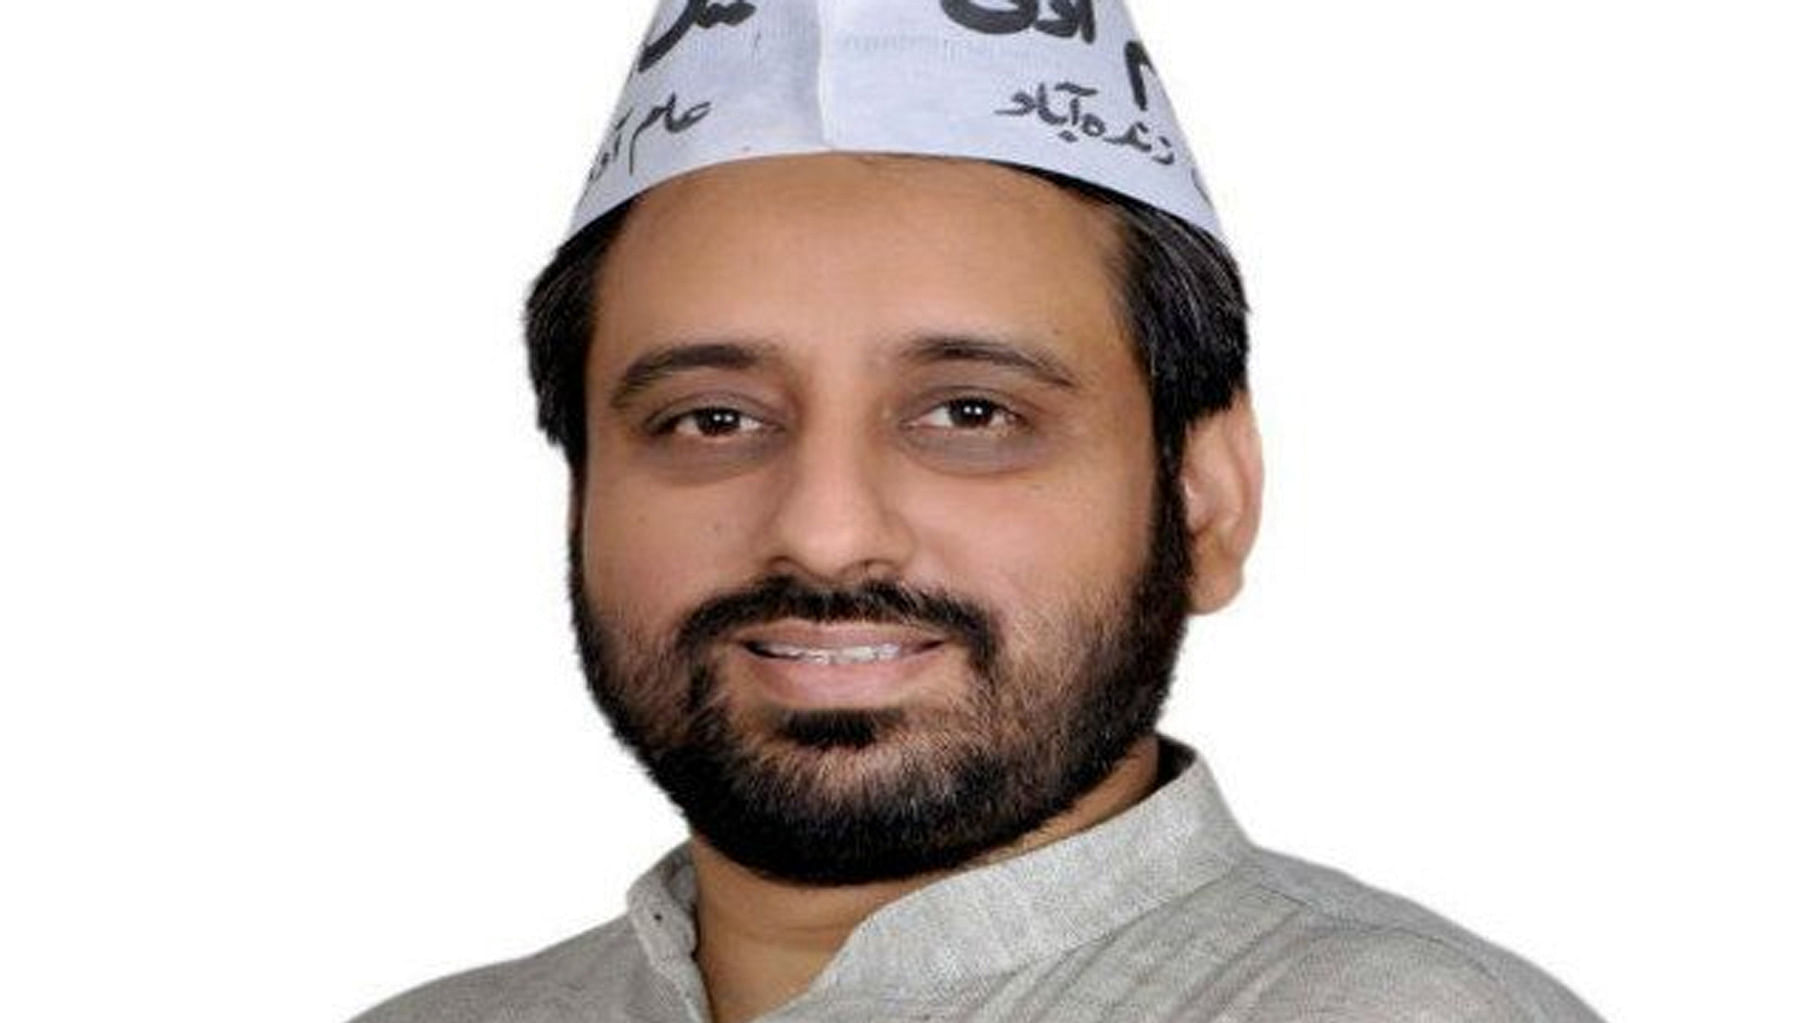 AAP MLA Amanatullah Khan resigned from all positions on Saturday. (Photo Courtesy: Twitter/<a href="https://twitter.com/KhanAmanatullah">@KhanAmanatullah</a>)